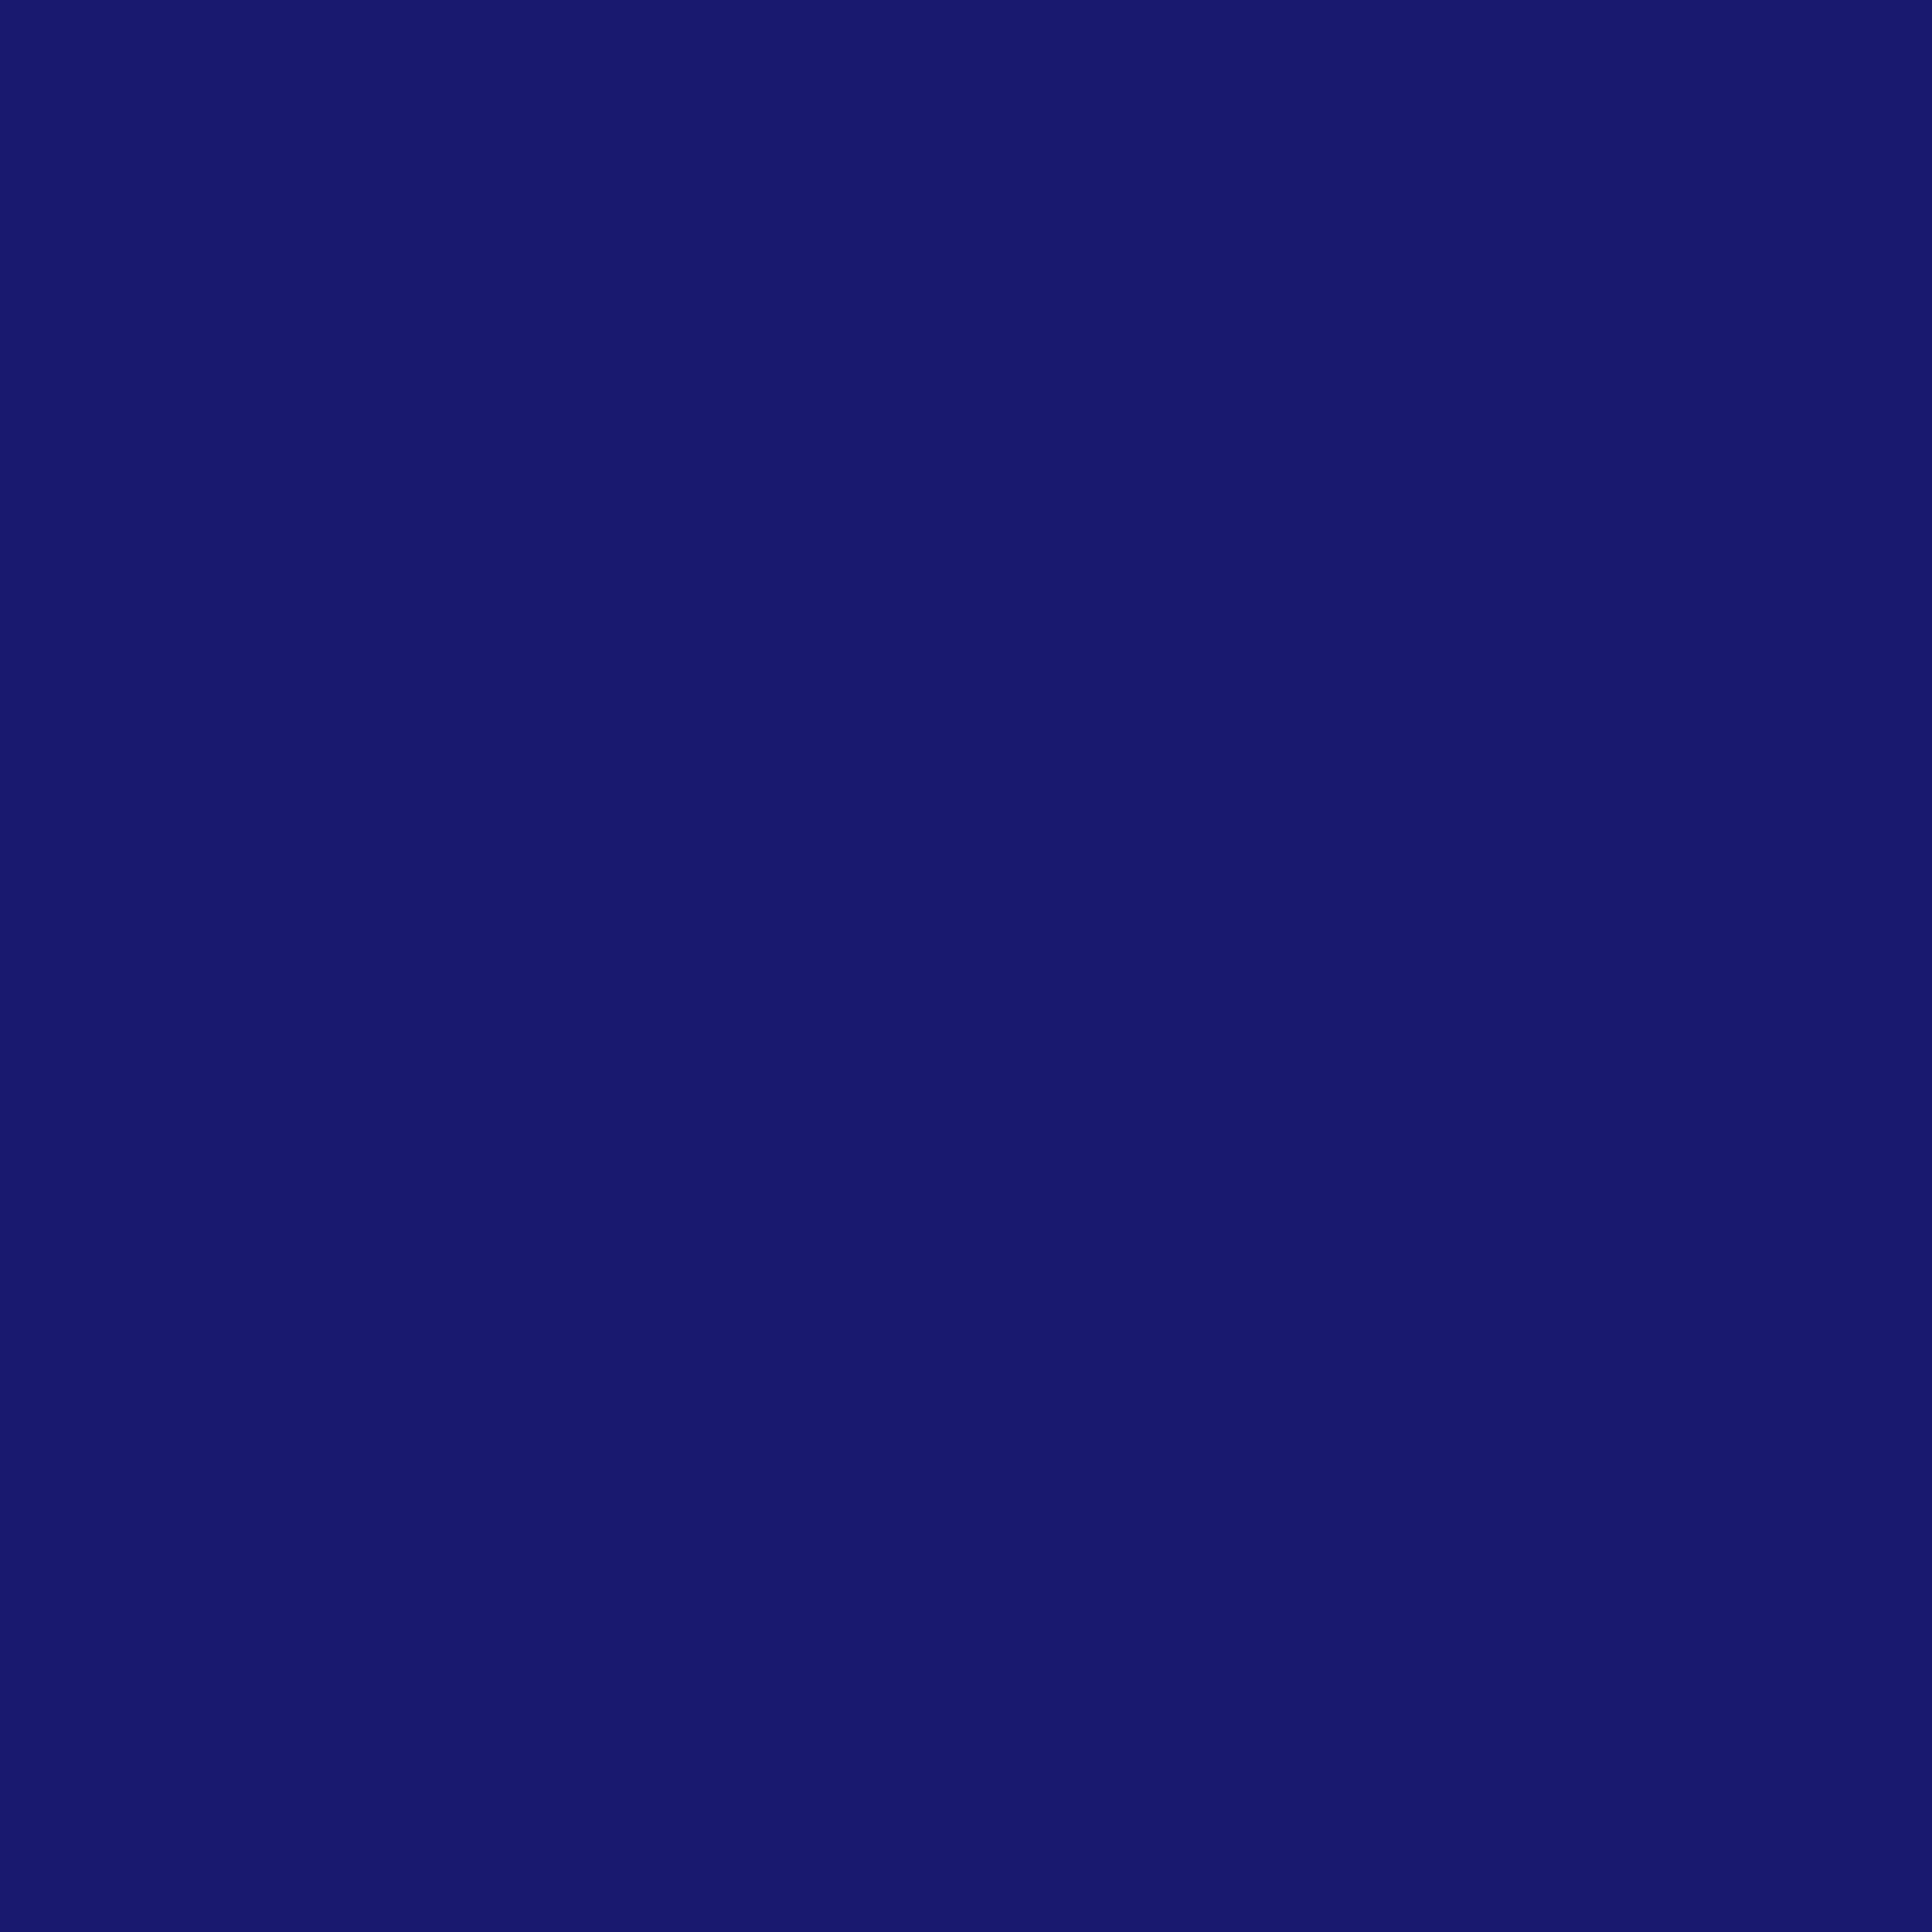 2732x2732 Midnight Blue Solid Color Background